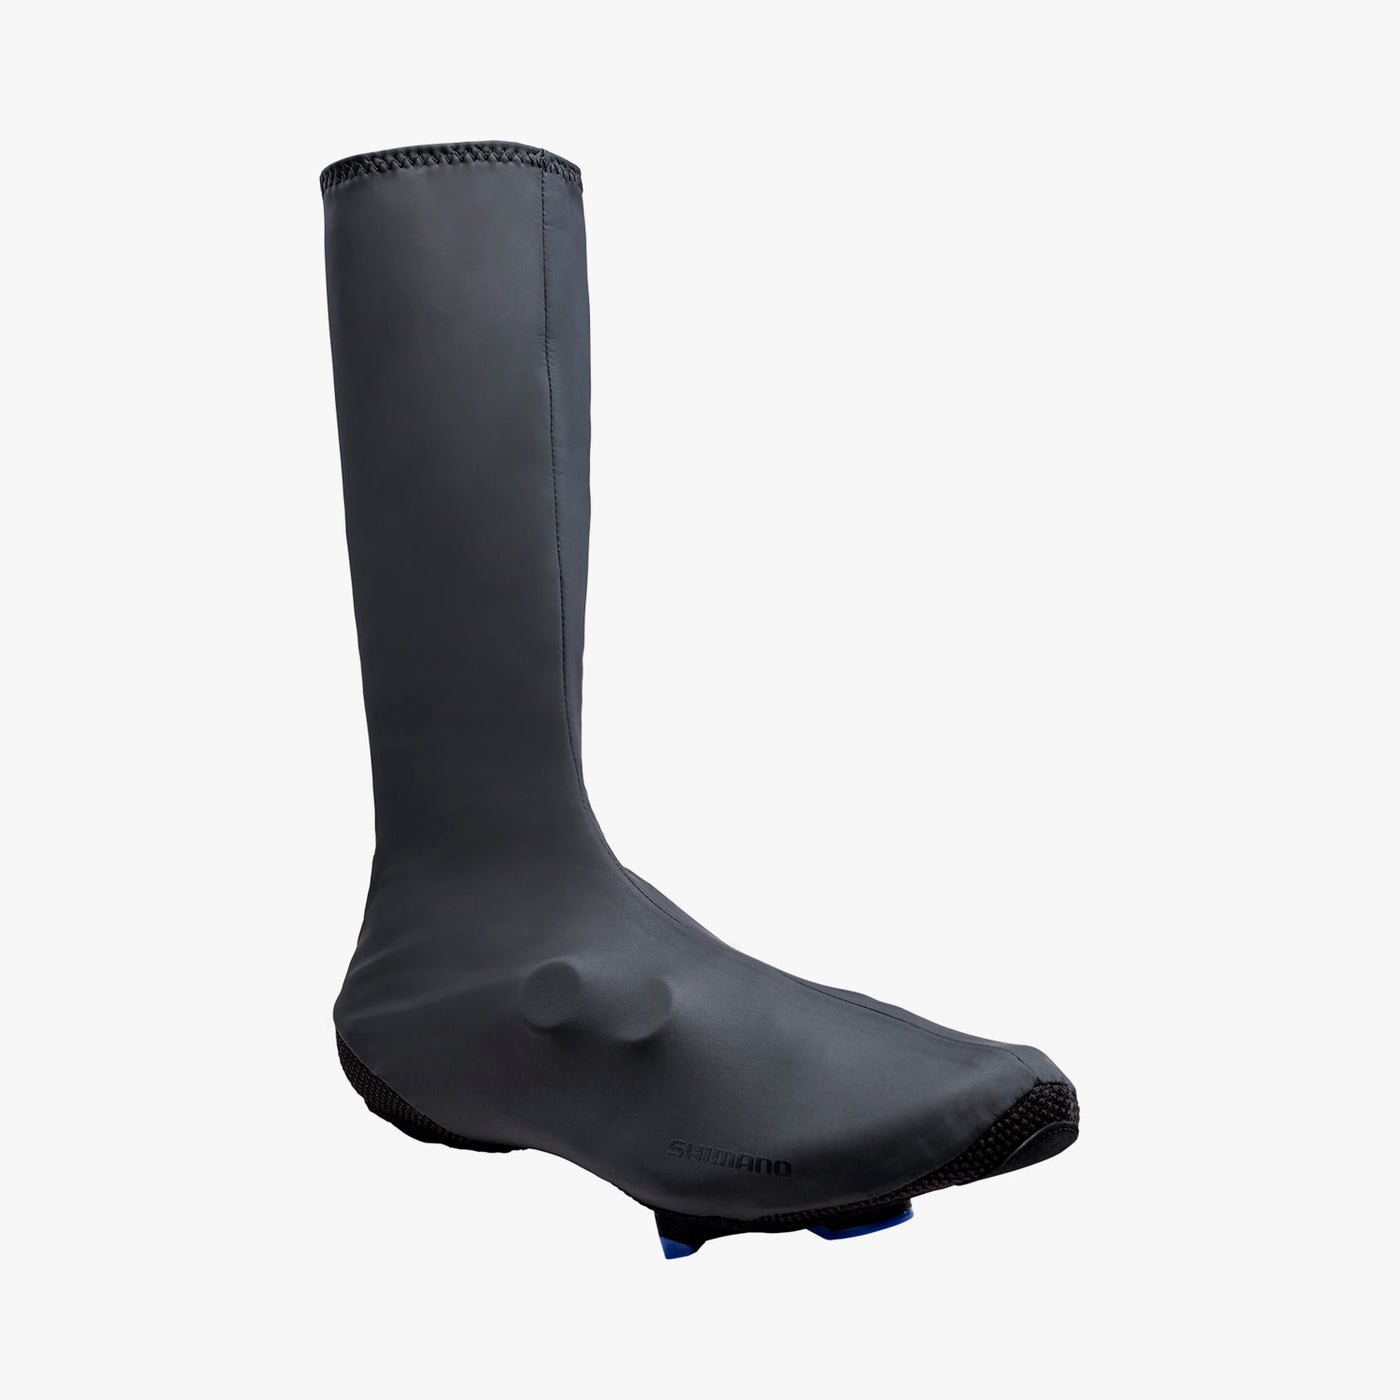 Shimano S-PHYRE Tall Shoe Black Covers